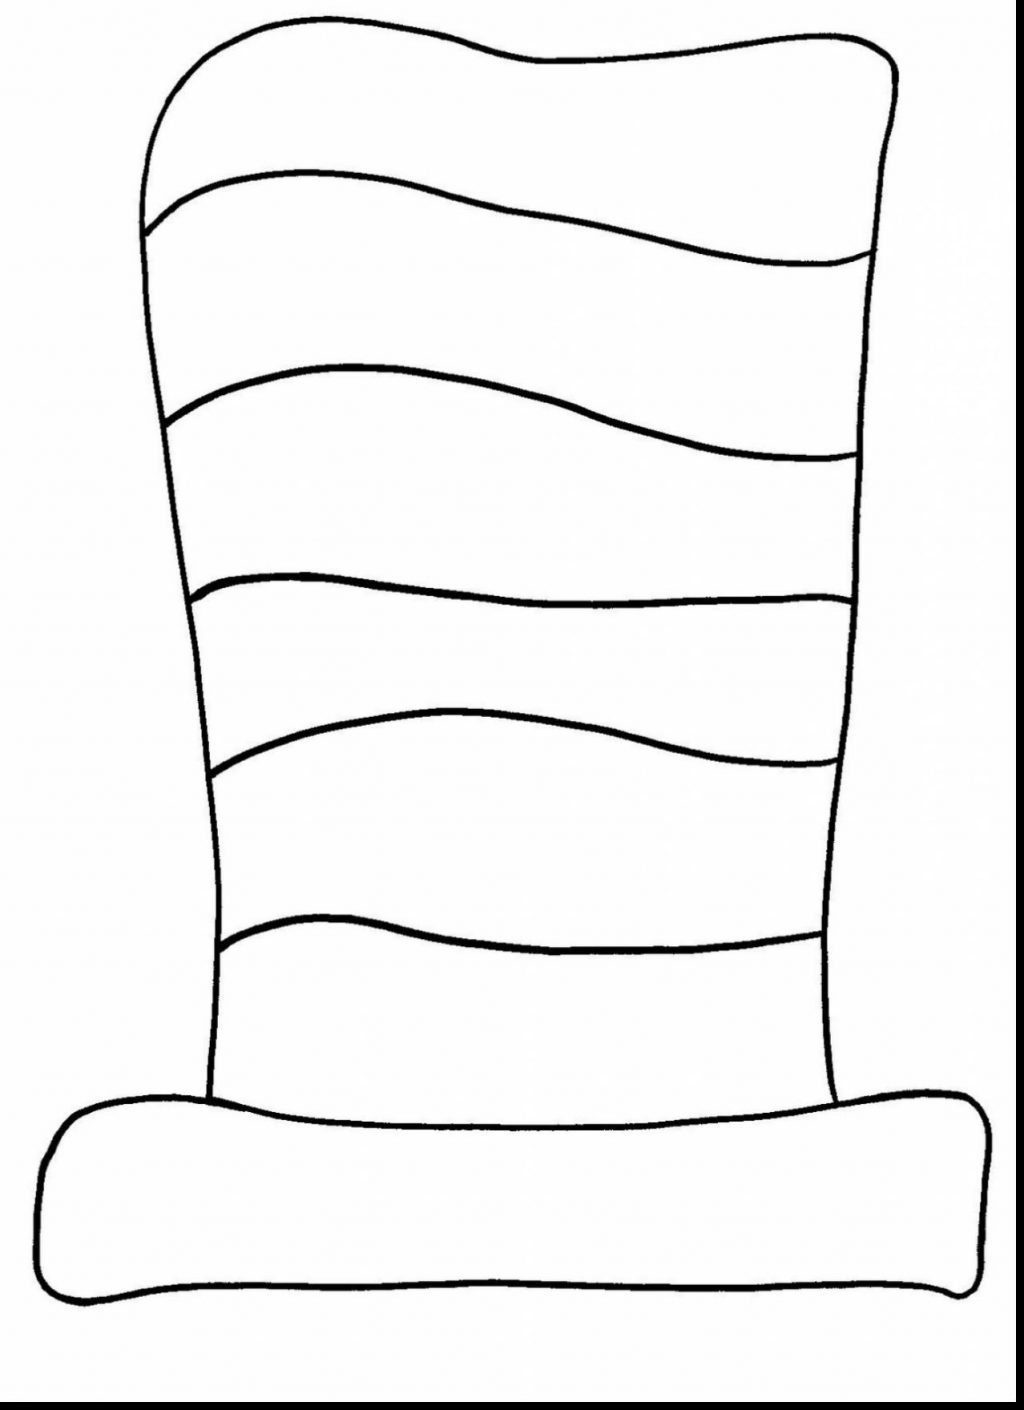 Cat In The Hat Coloring Page Cat In The Hat Coloring Page Cat In The Hat Coloring Pages